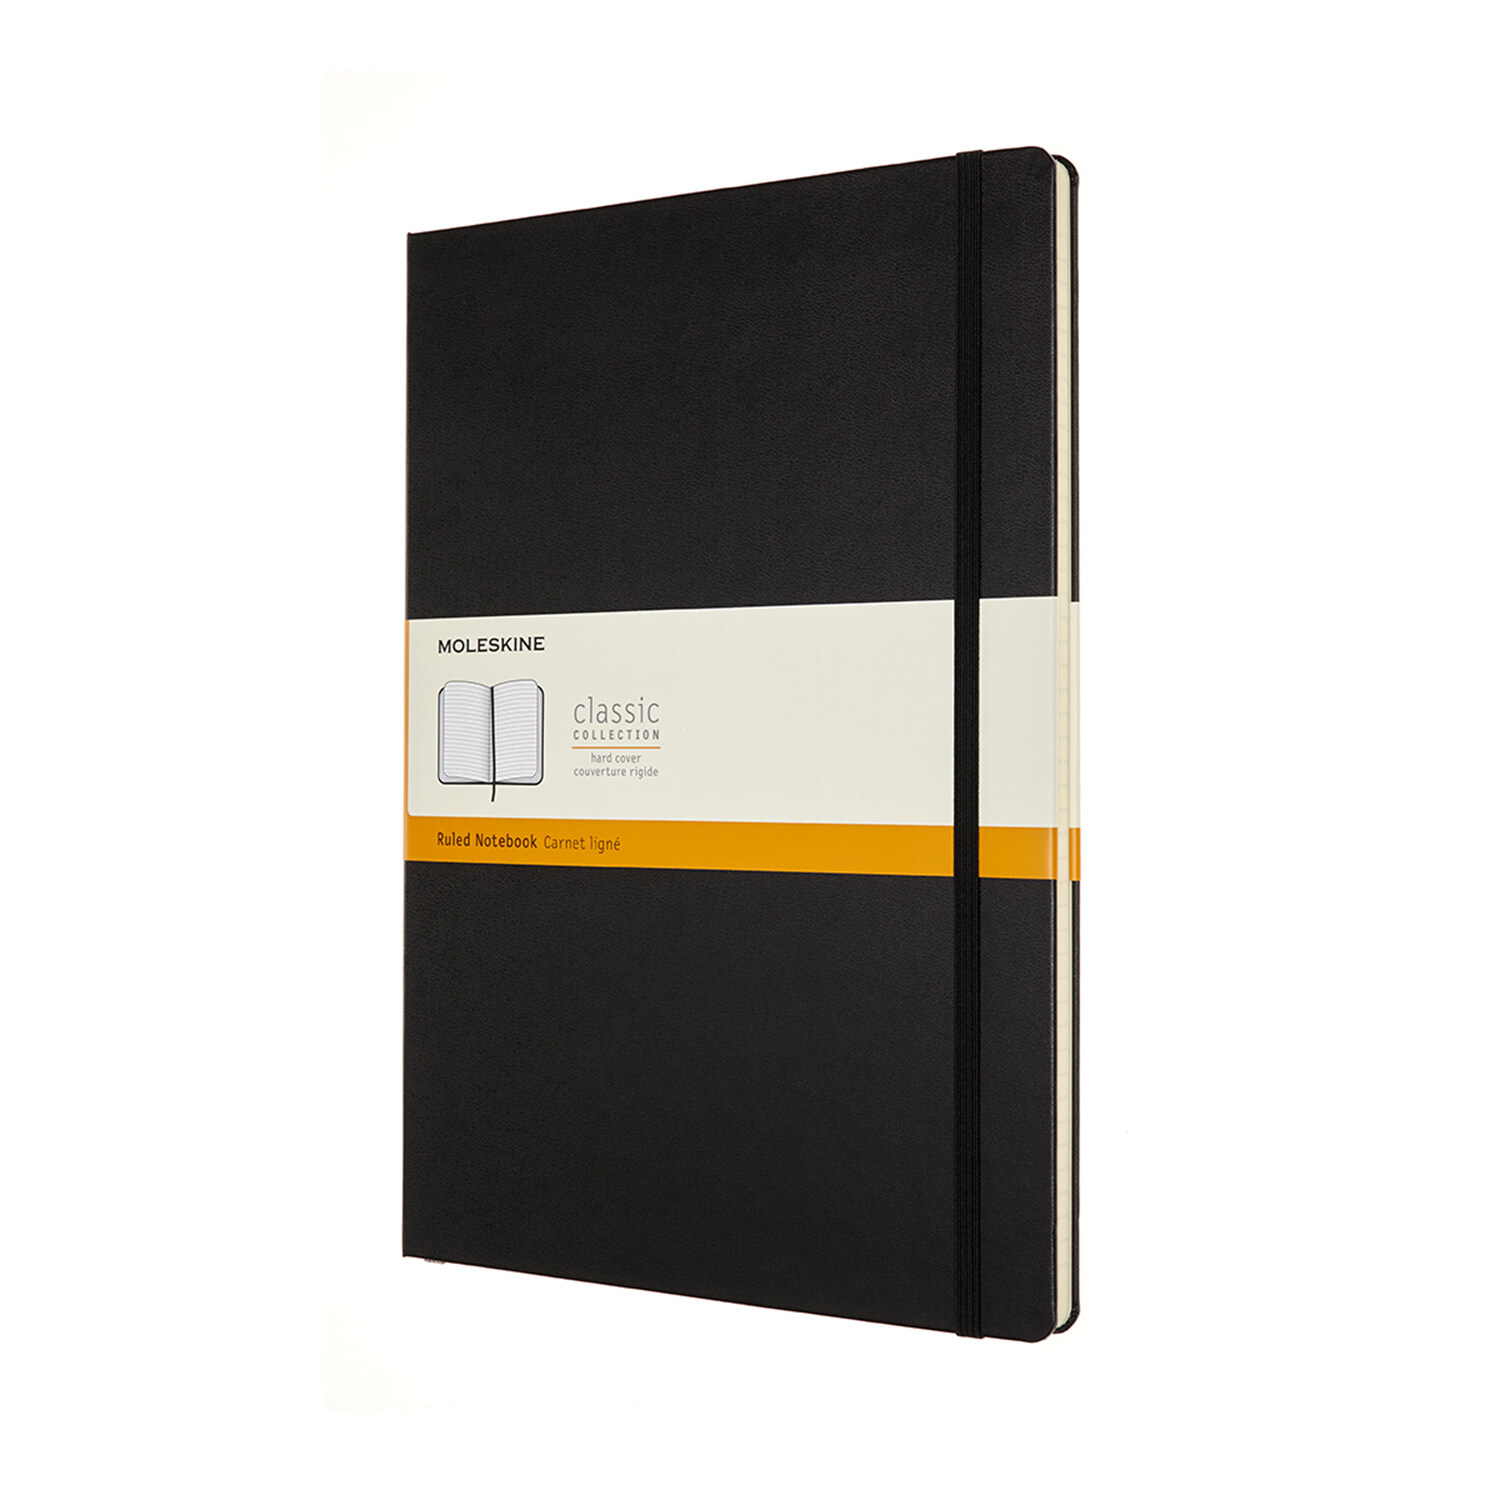 Moleskine Classic Ruled Paper Notebook, Hard Cover and Elastic Closure Journal, Size A4 21 x 29.7 cm - Black Colour